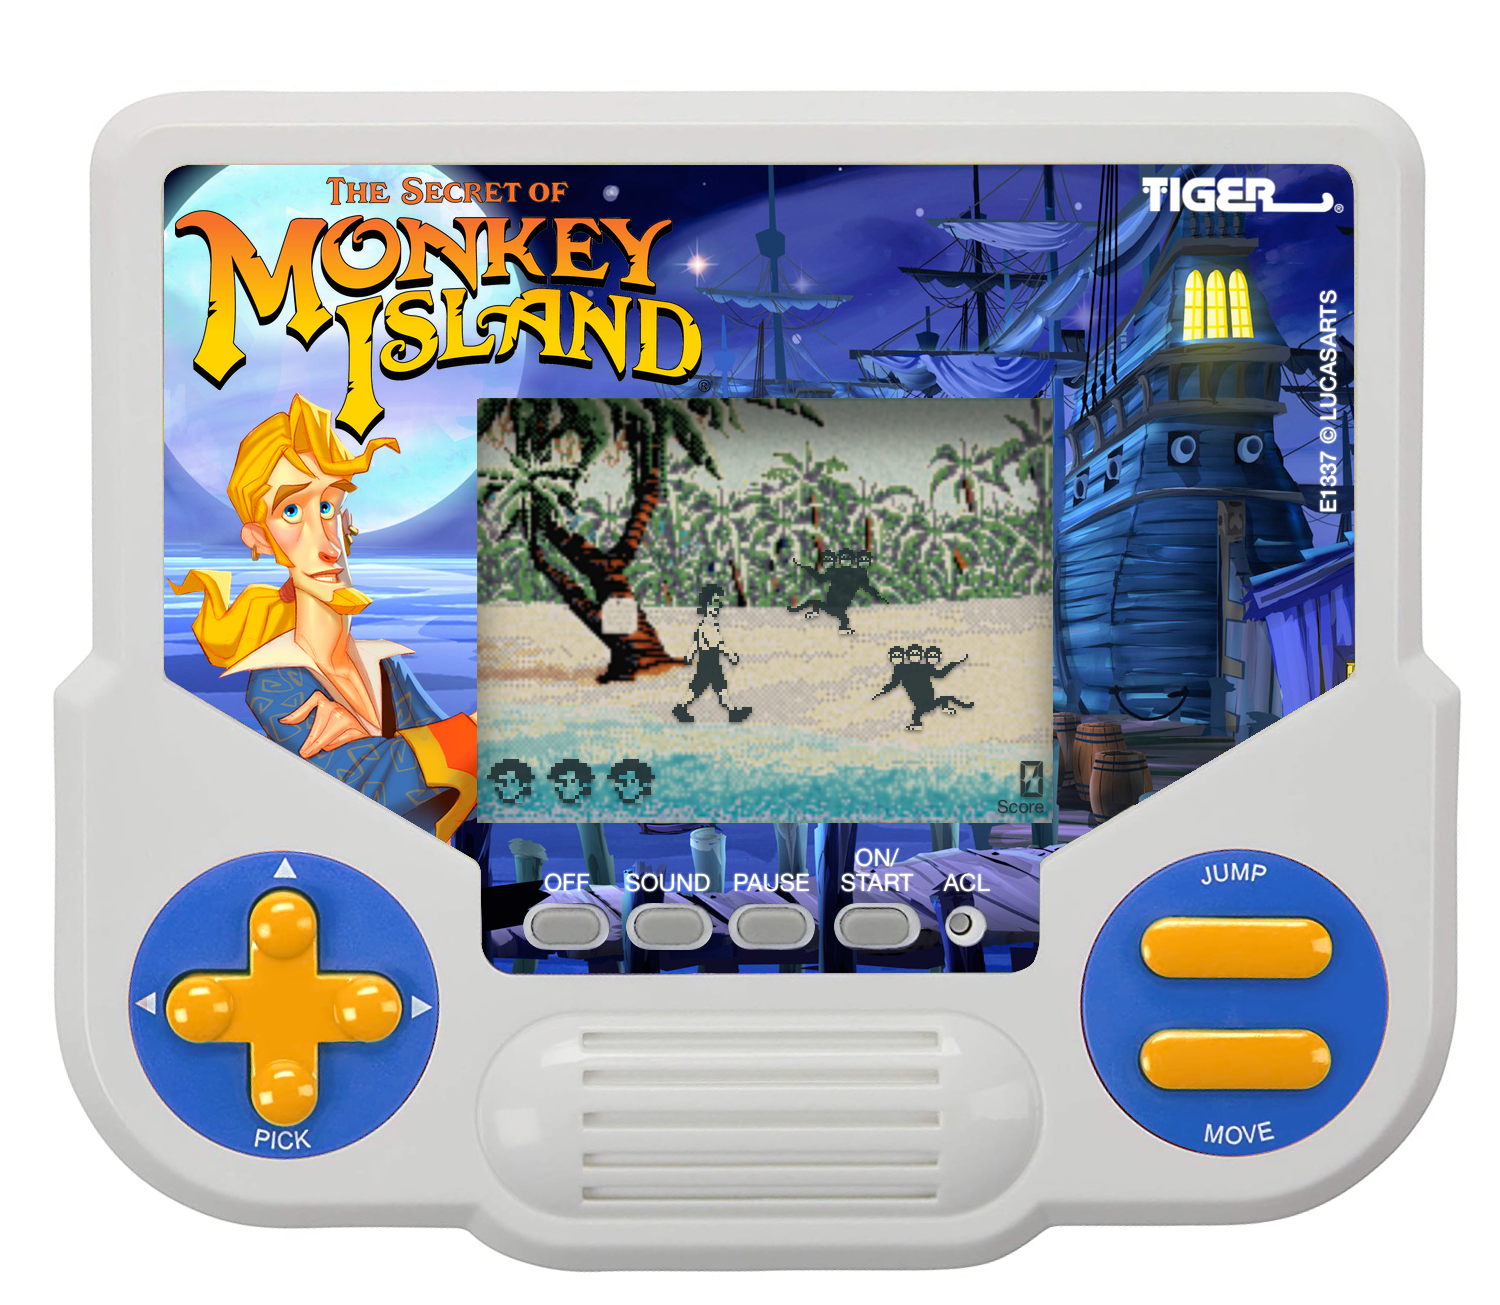 The Tiger Electronics handheld LCD game version of The Secret of Monkey Island